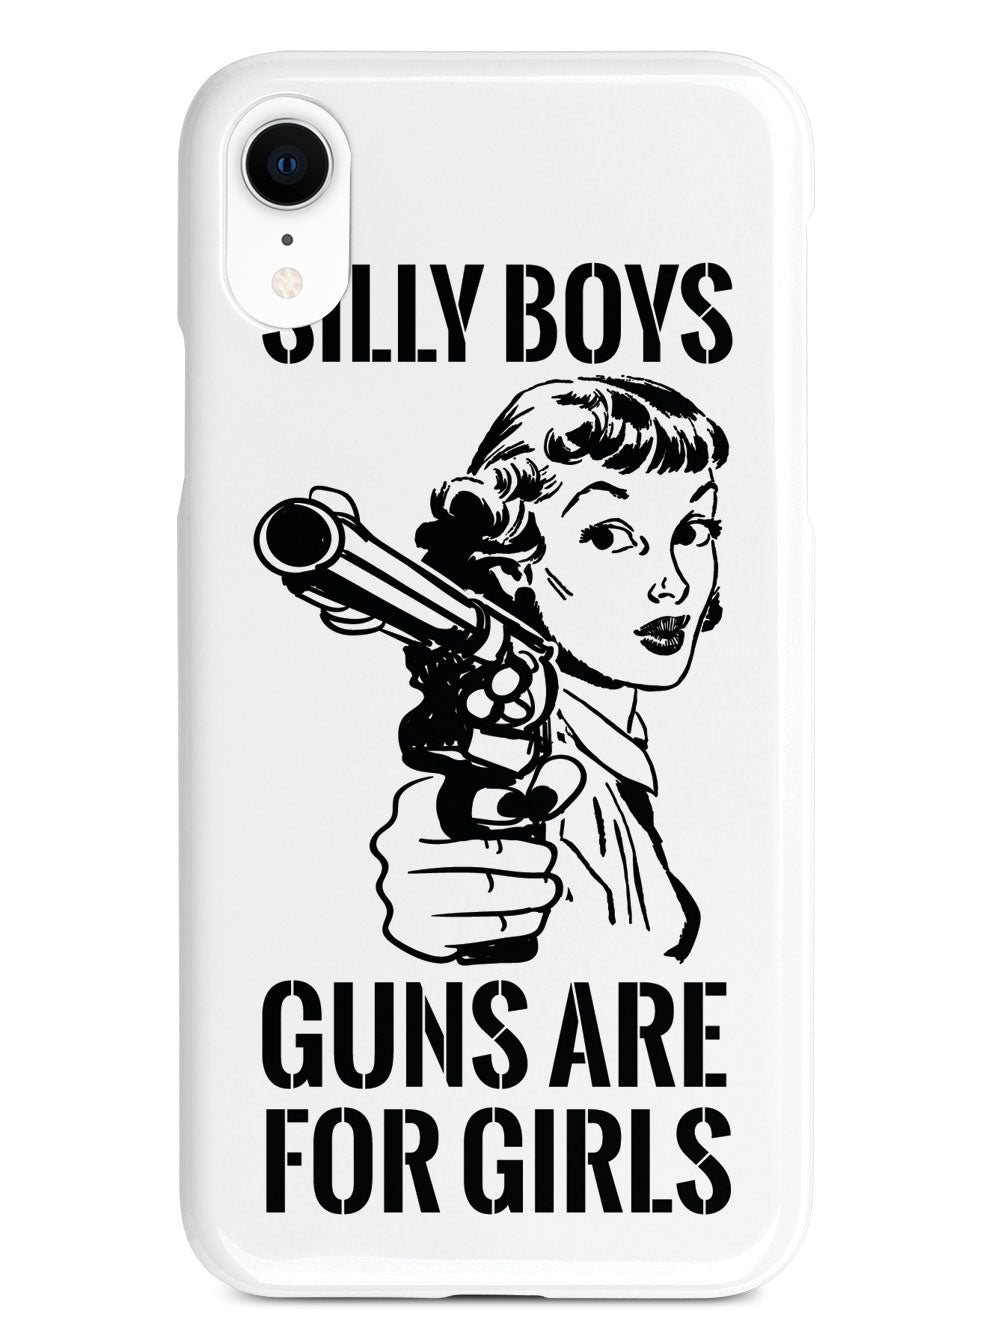 Silly Boys, Guns are for Girls - Black Text Case